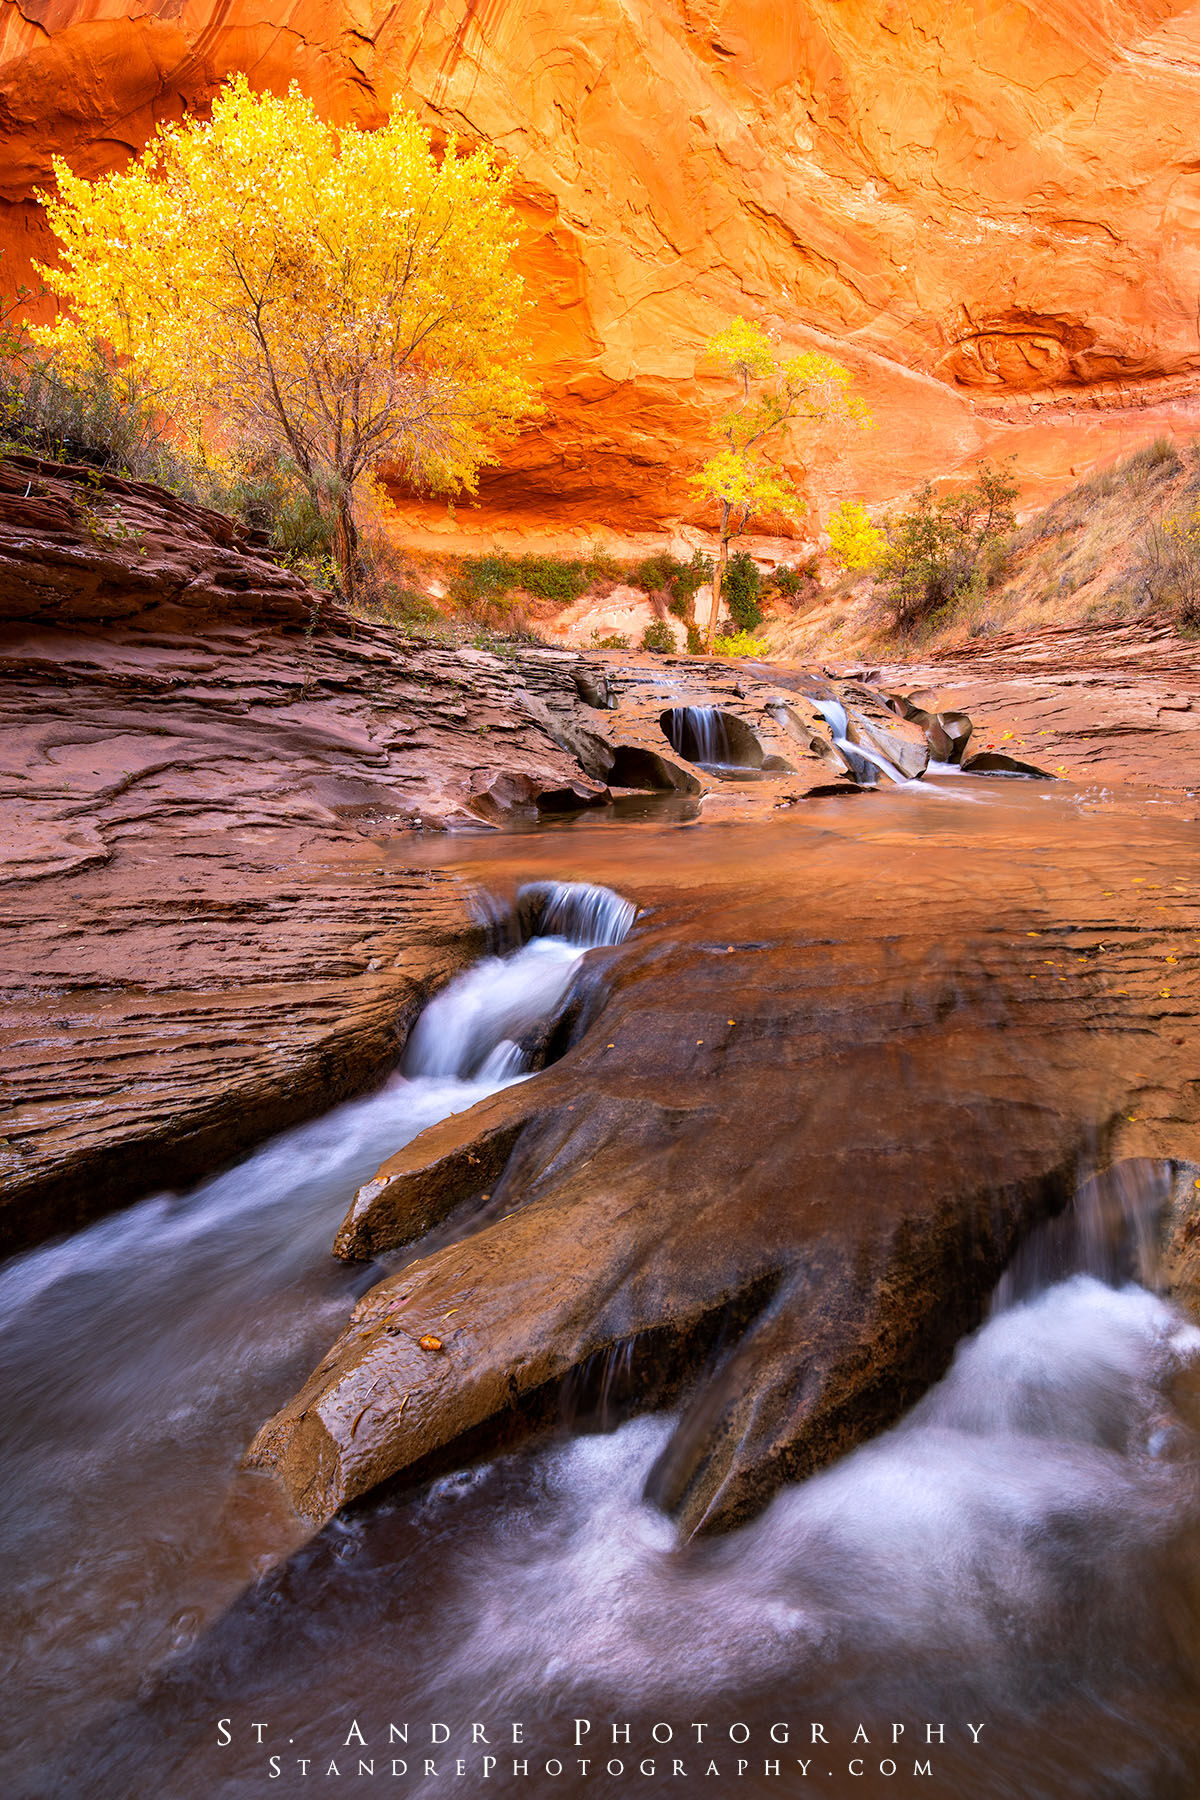 Swiss cheese falls in coyote gulch with a rock formation that looks like a dinosaur track is seen in the foreground and fall colored trees in a deep canyon. 